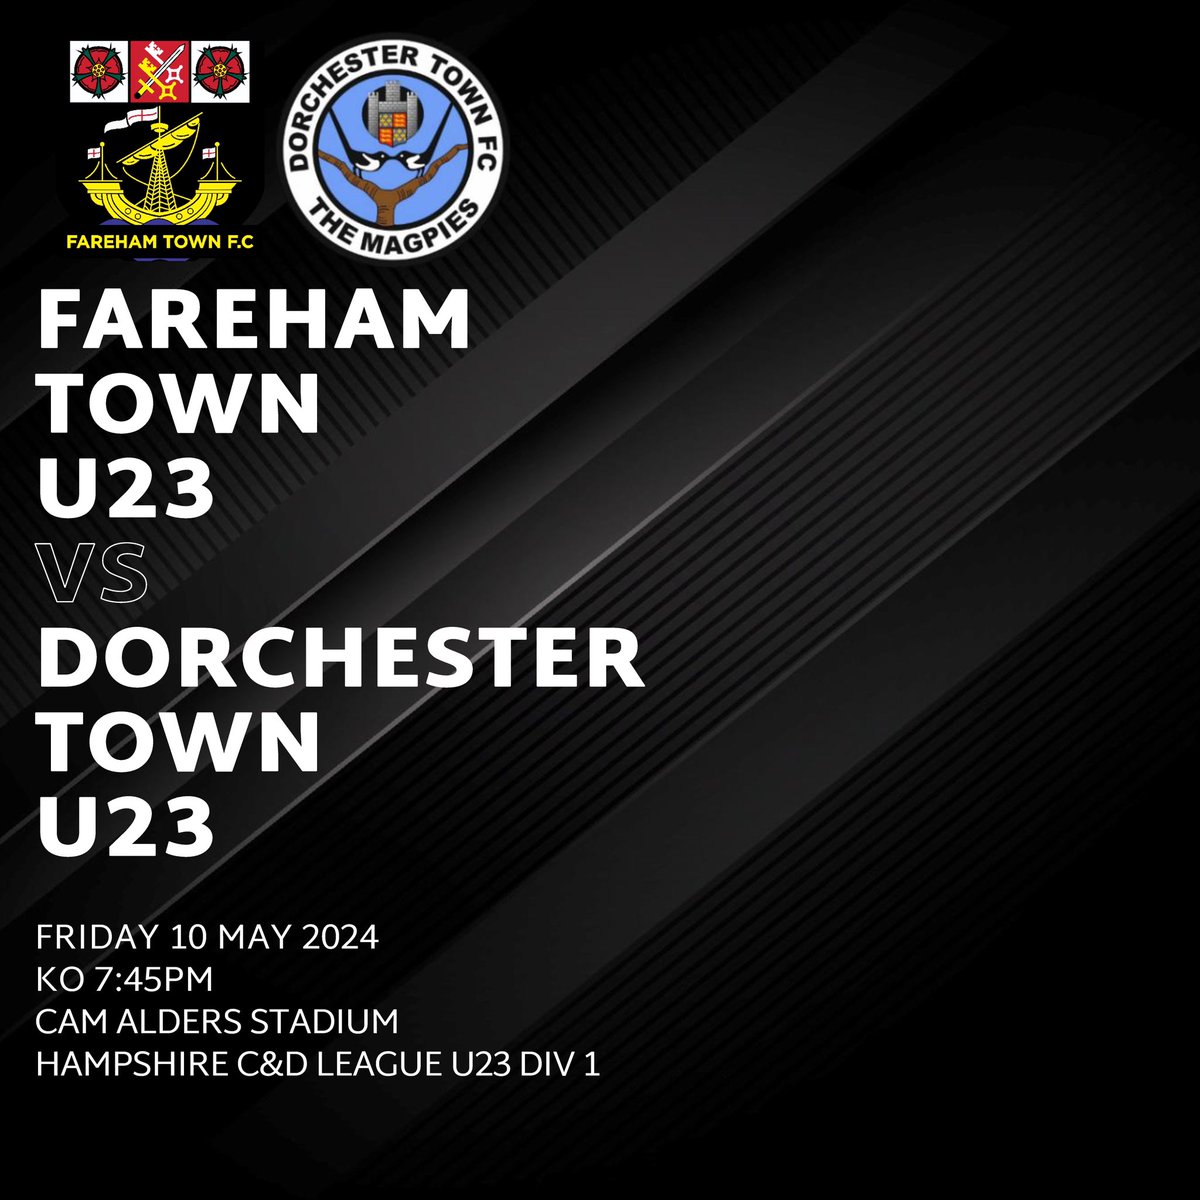 ⚽️ | 𝗠𝗔𝗧𝗖𝗛𝗗𝗔𝗬! The season isn’t complete yet for our top of the table U23s who travel to Fareham this evening 💪 🆚 @FarehamTownU23s 📅 Fri 10 May ⏰ 7:45pm 🏟️ Cam Alders Stadium #WeAreDorch ⚫️⚪️